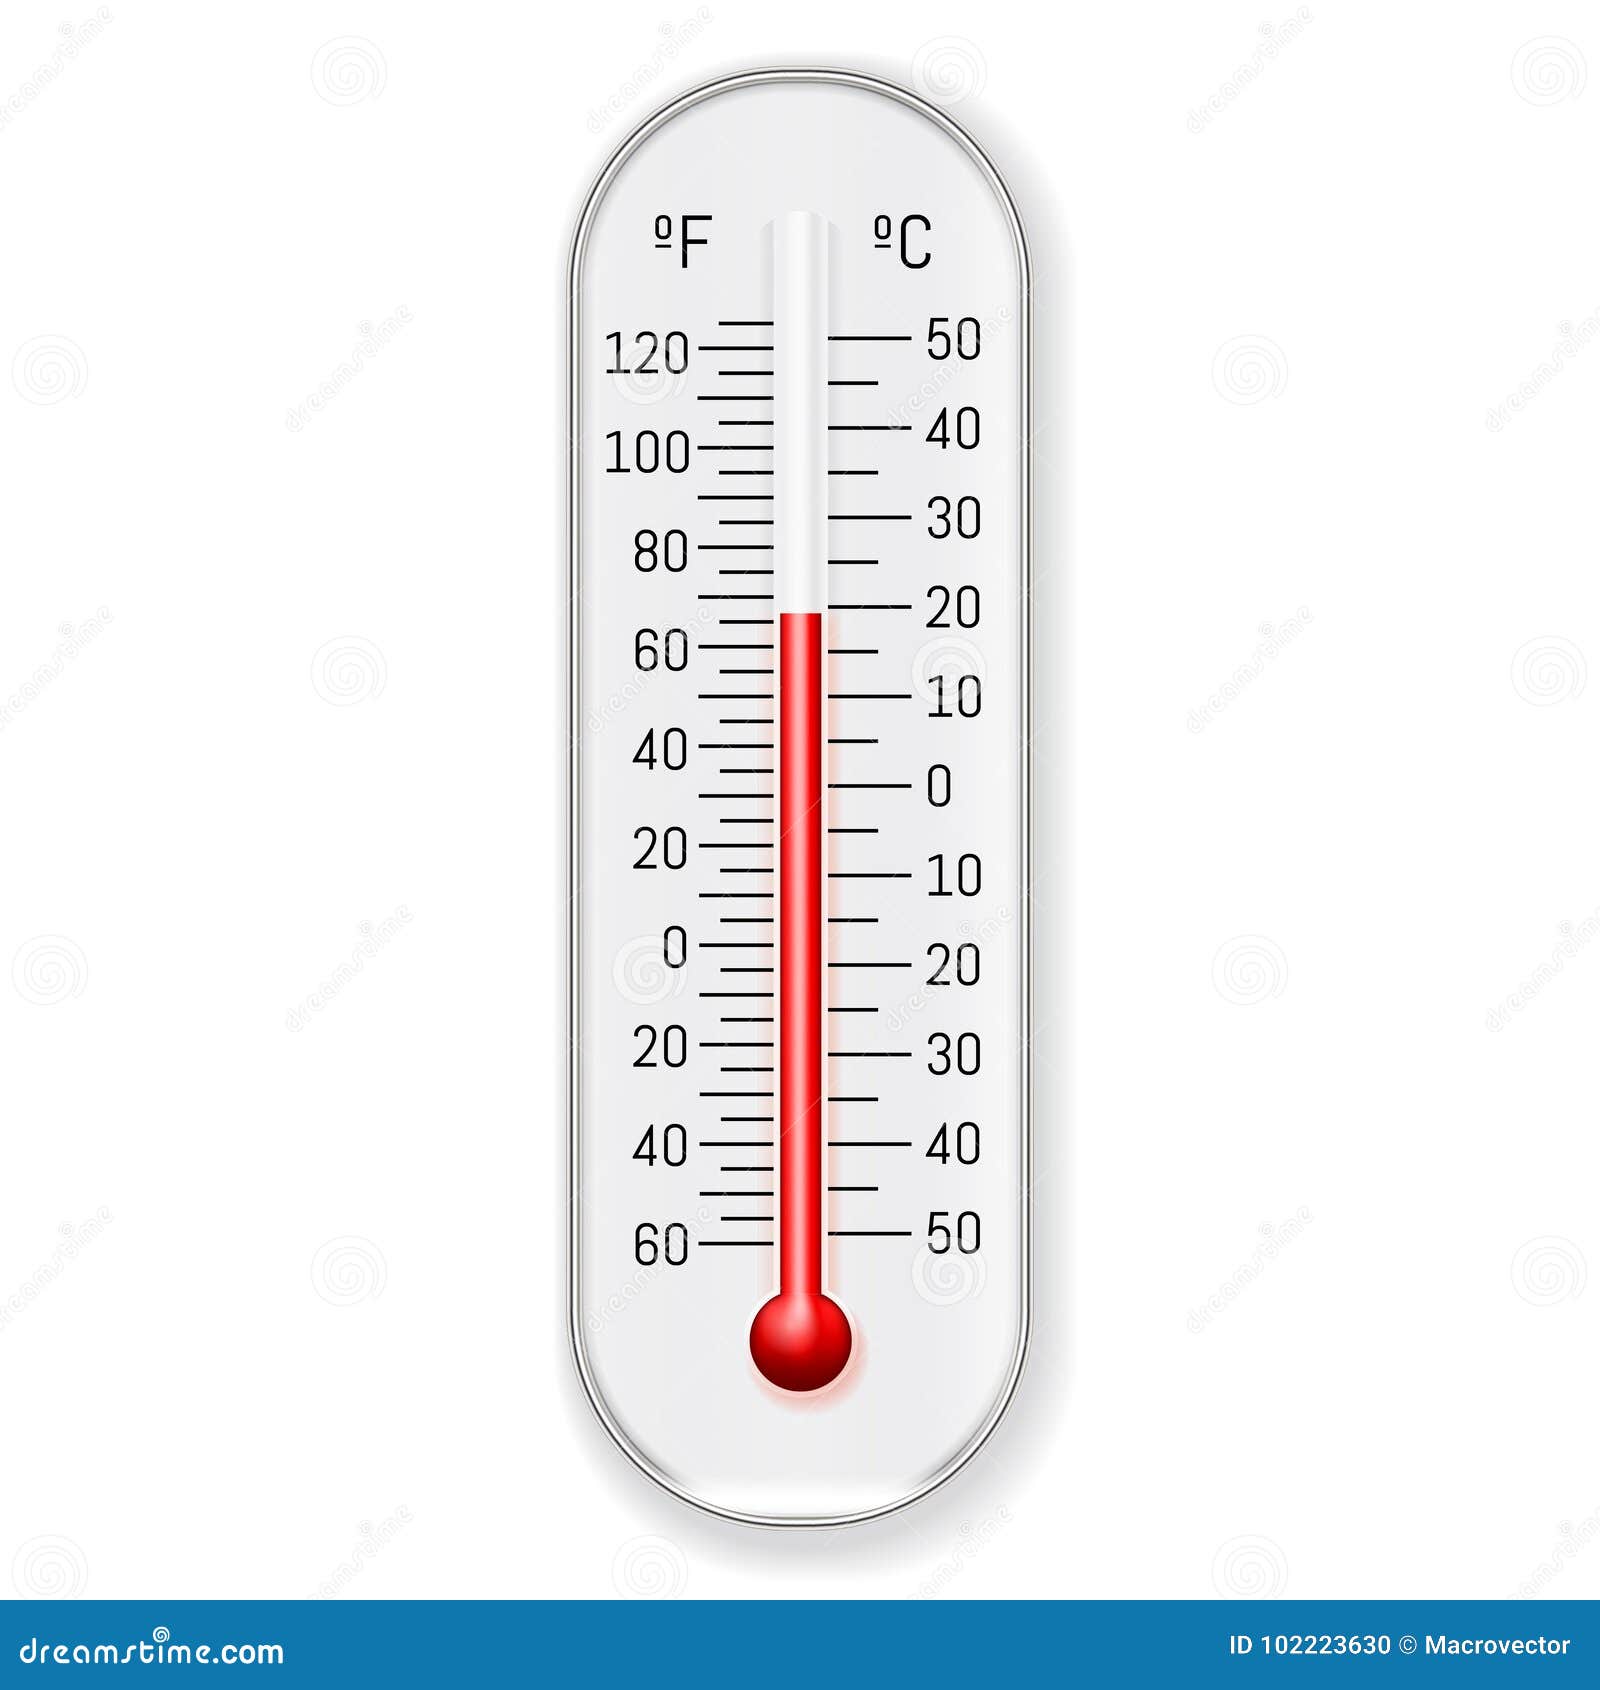 https://thumbs.dreamstime.com/z/meteorology-thermometer-celsius-fahrenheit-realistic-classic-outdoor-indoor-celsius-fahrenheit-alcohol-ethanol-red-dye-102223630.jpg